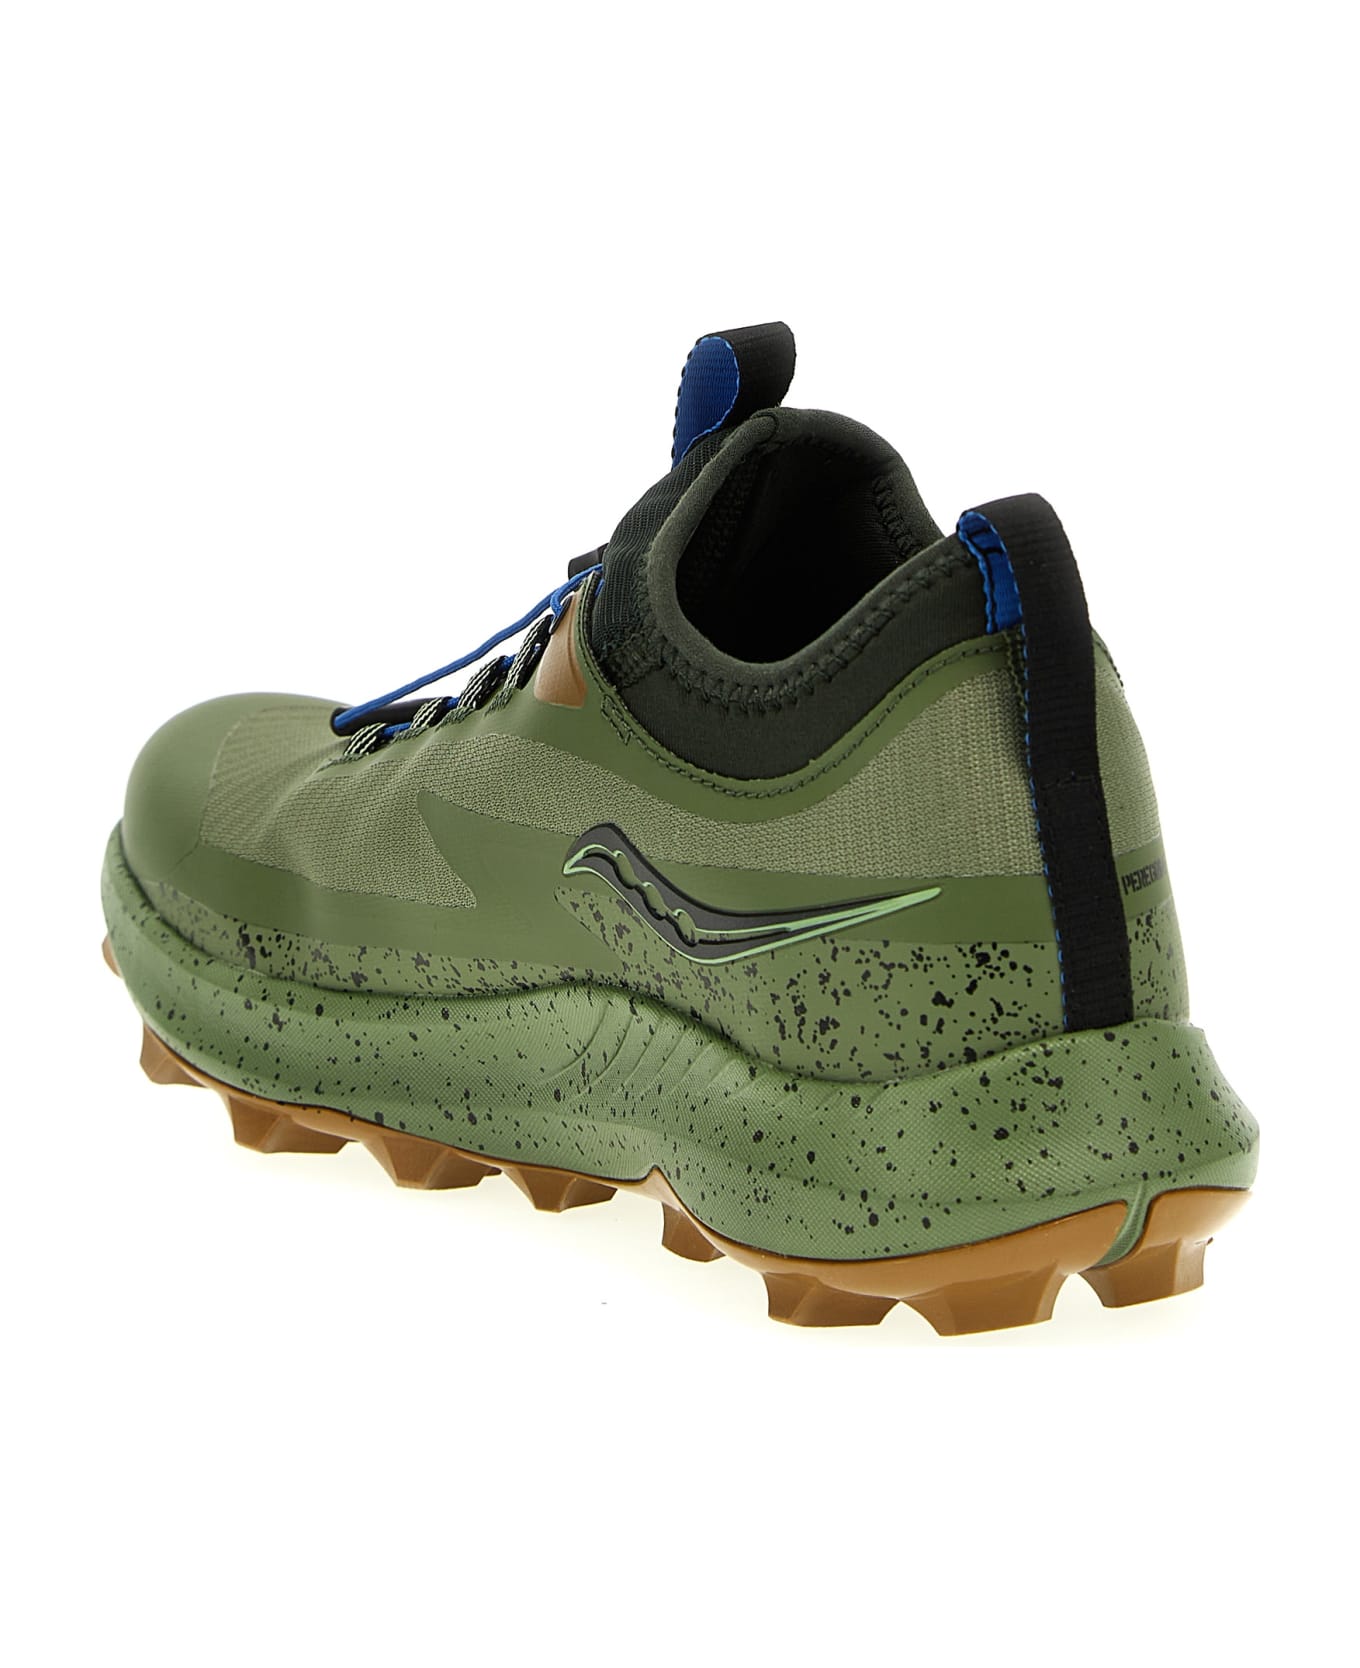 Saucony 'peregrine 13 St' Sneakers - Green